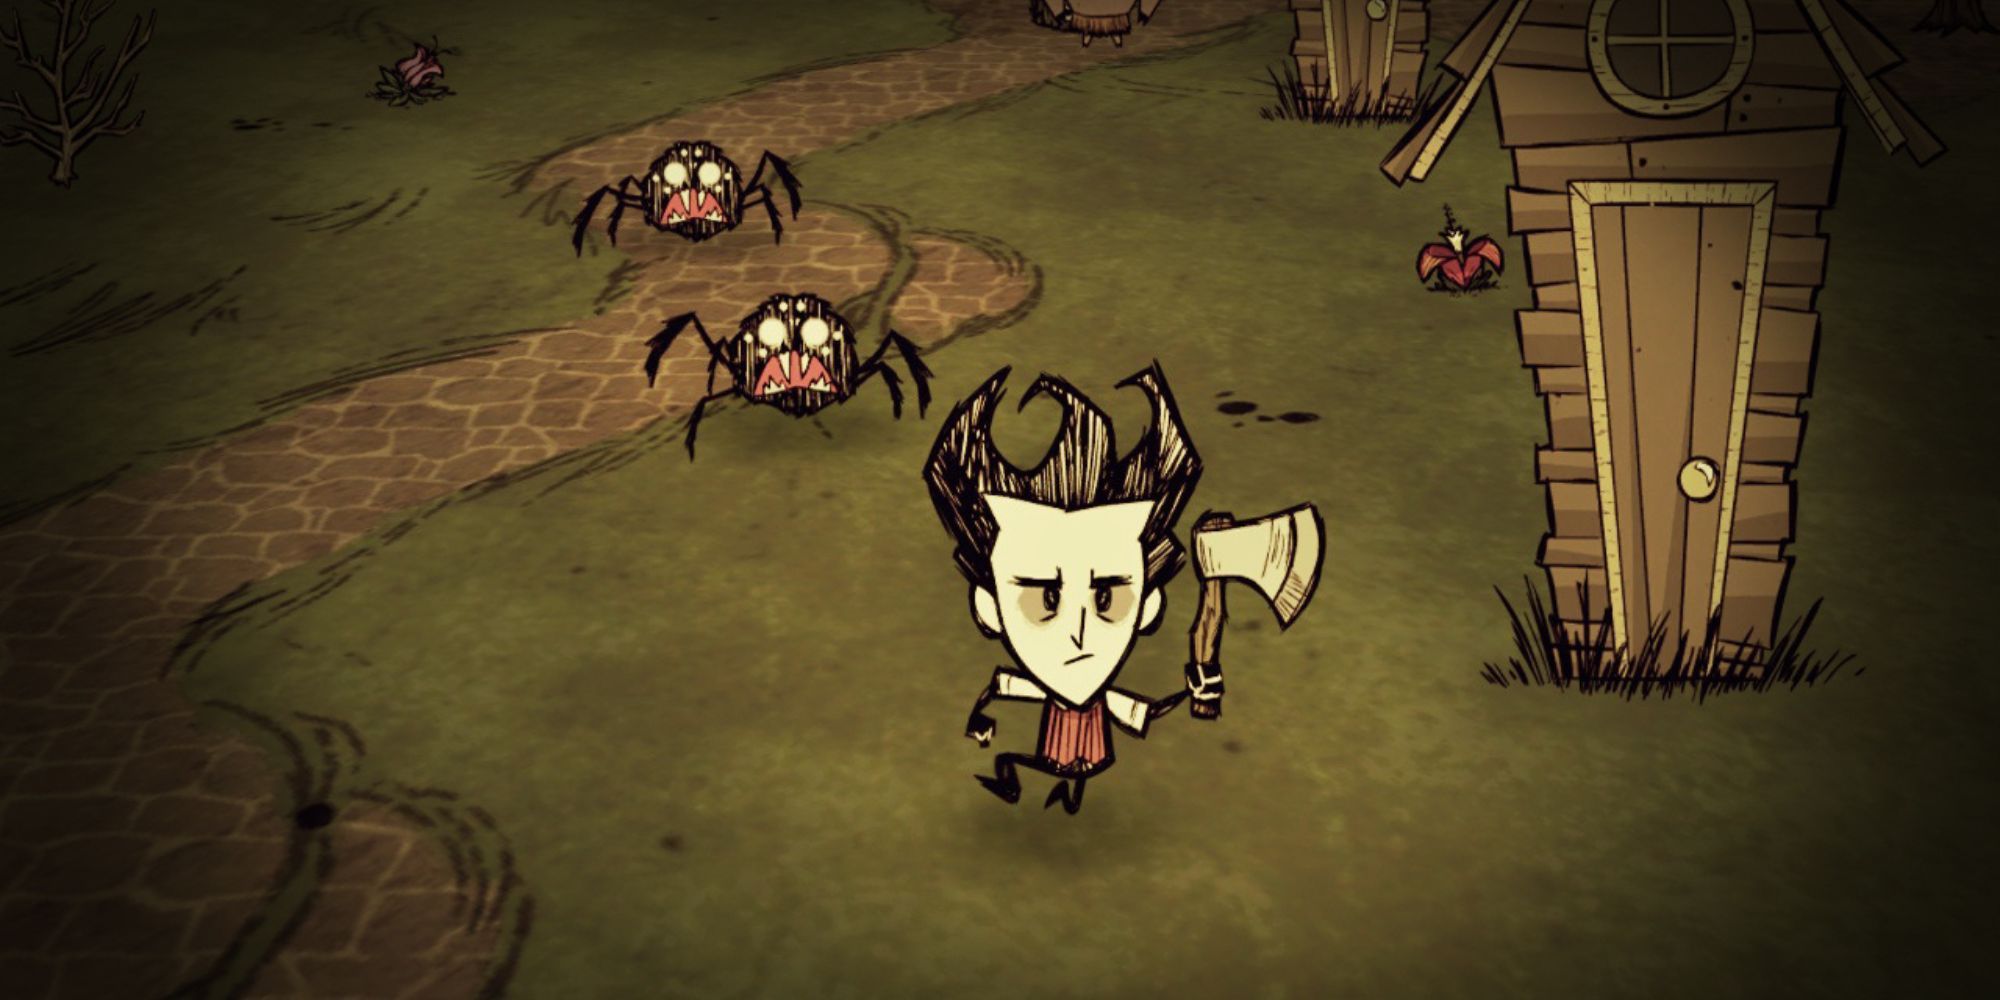 Wilson in Don’t Starve being chased by spiders